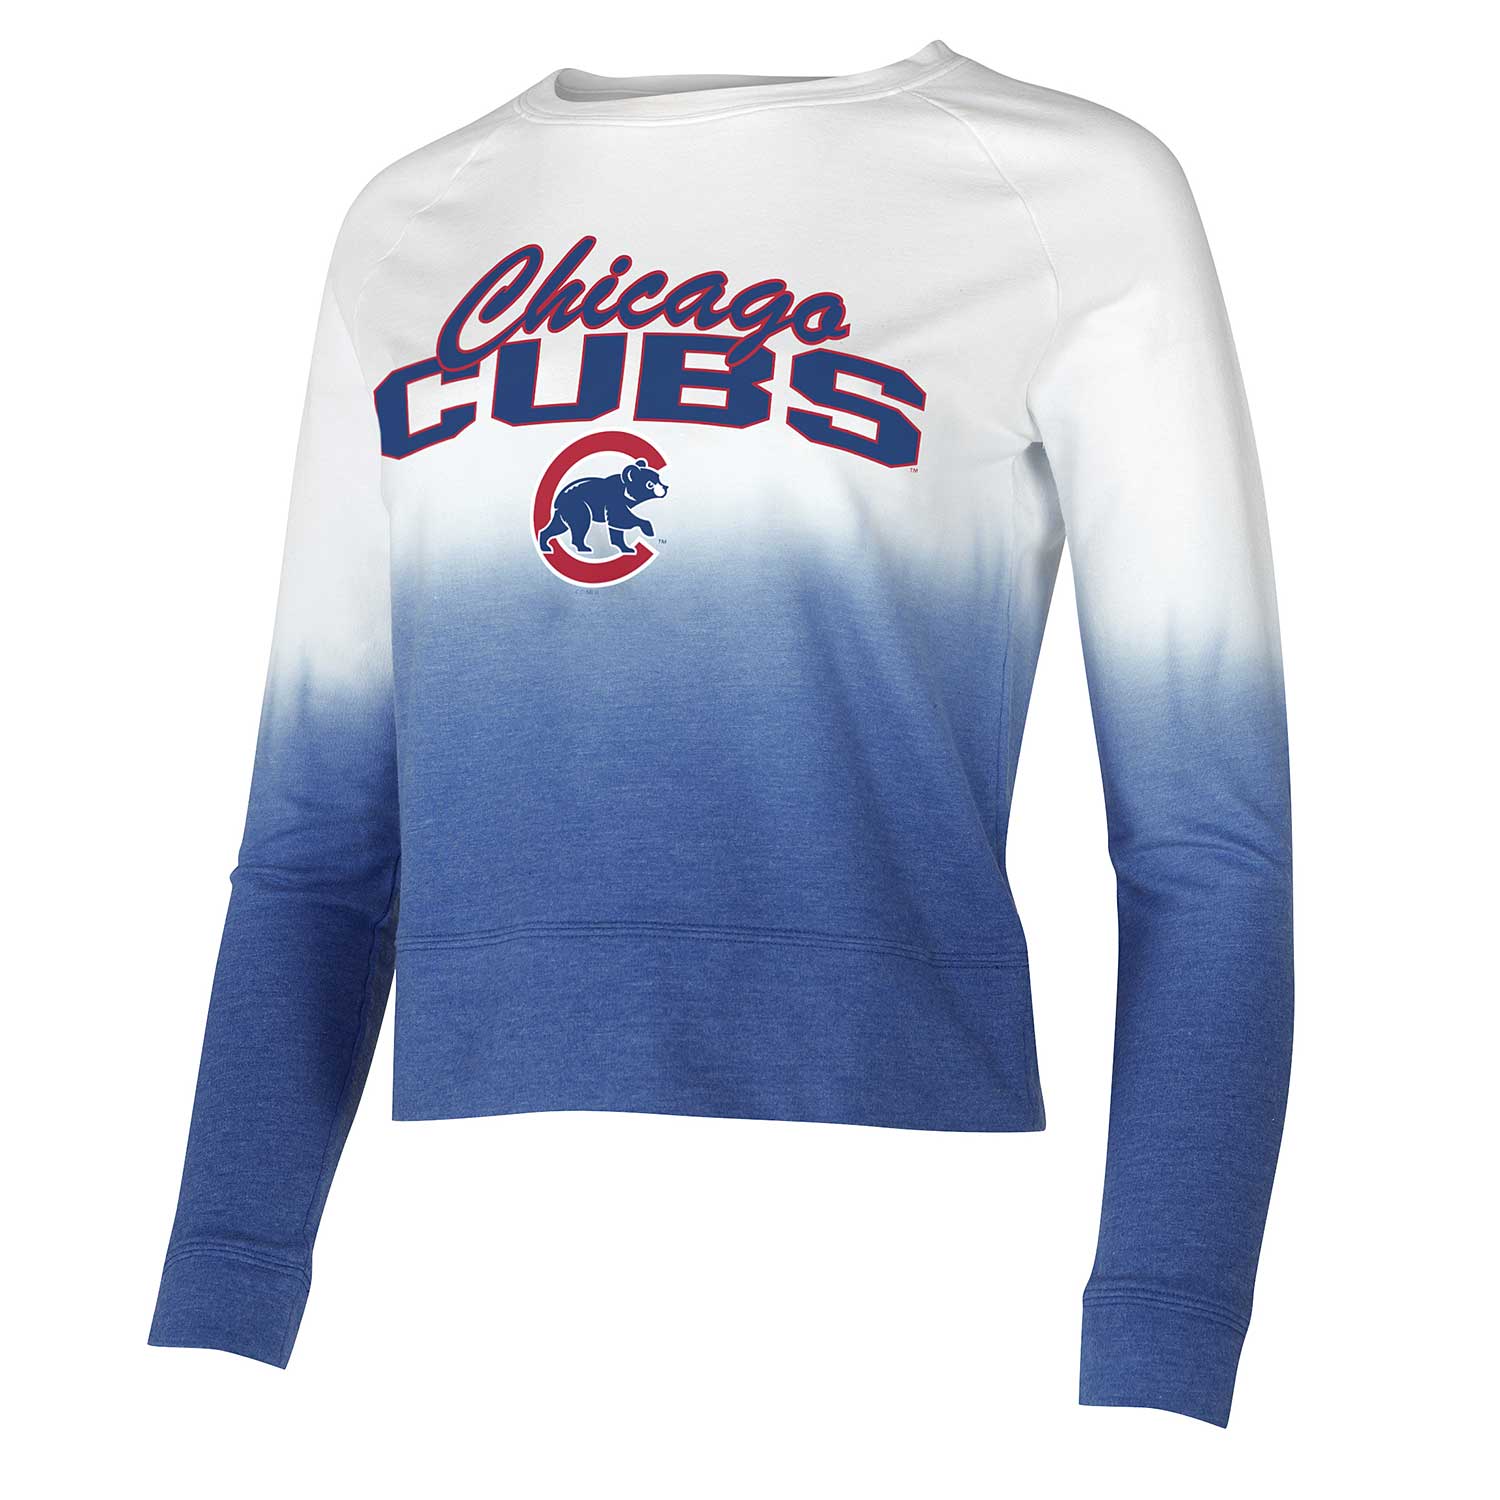 Women's Chicago Cubs Gear, Womens Cubs Apparel, Ladies Cubs Outfits